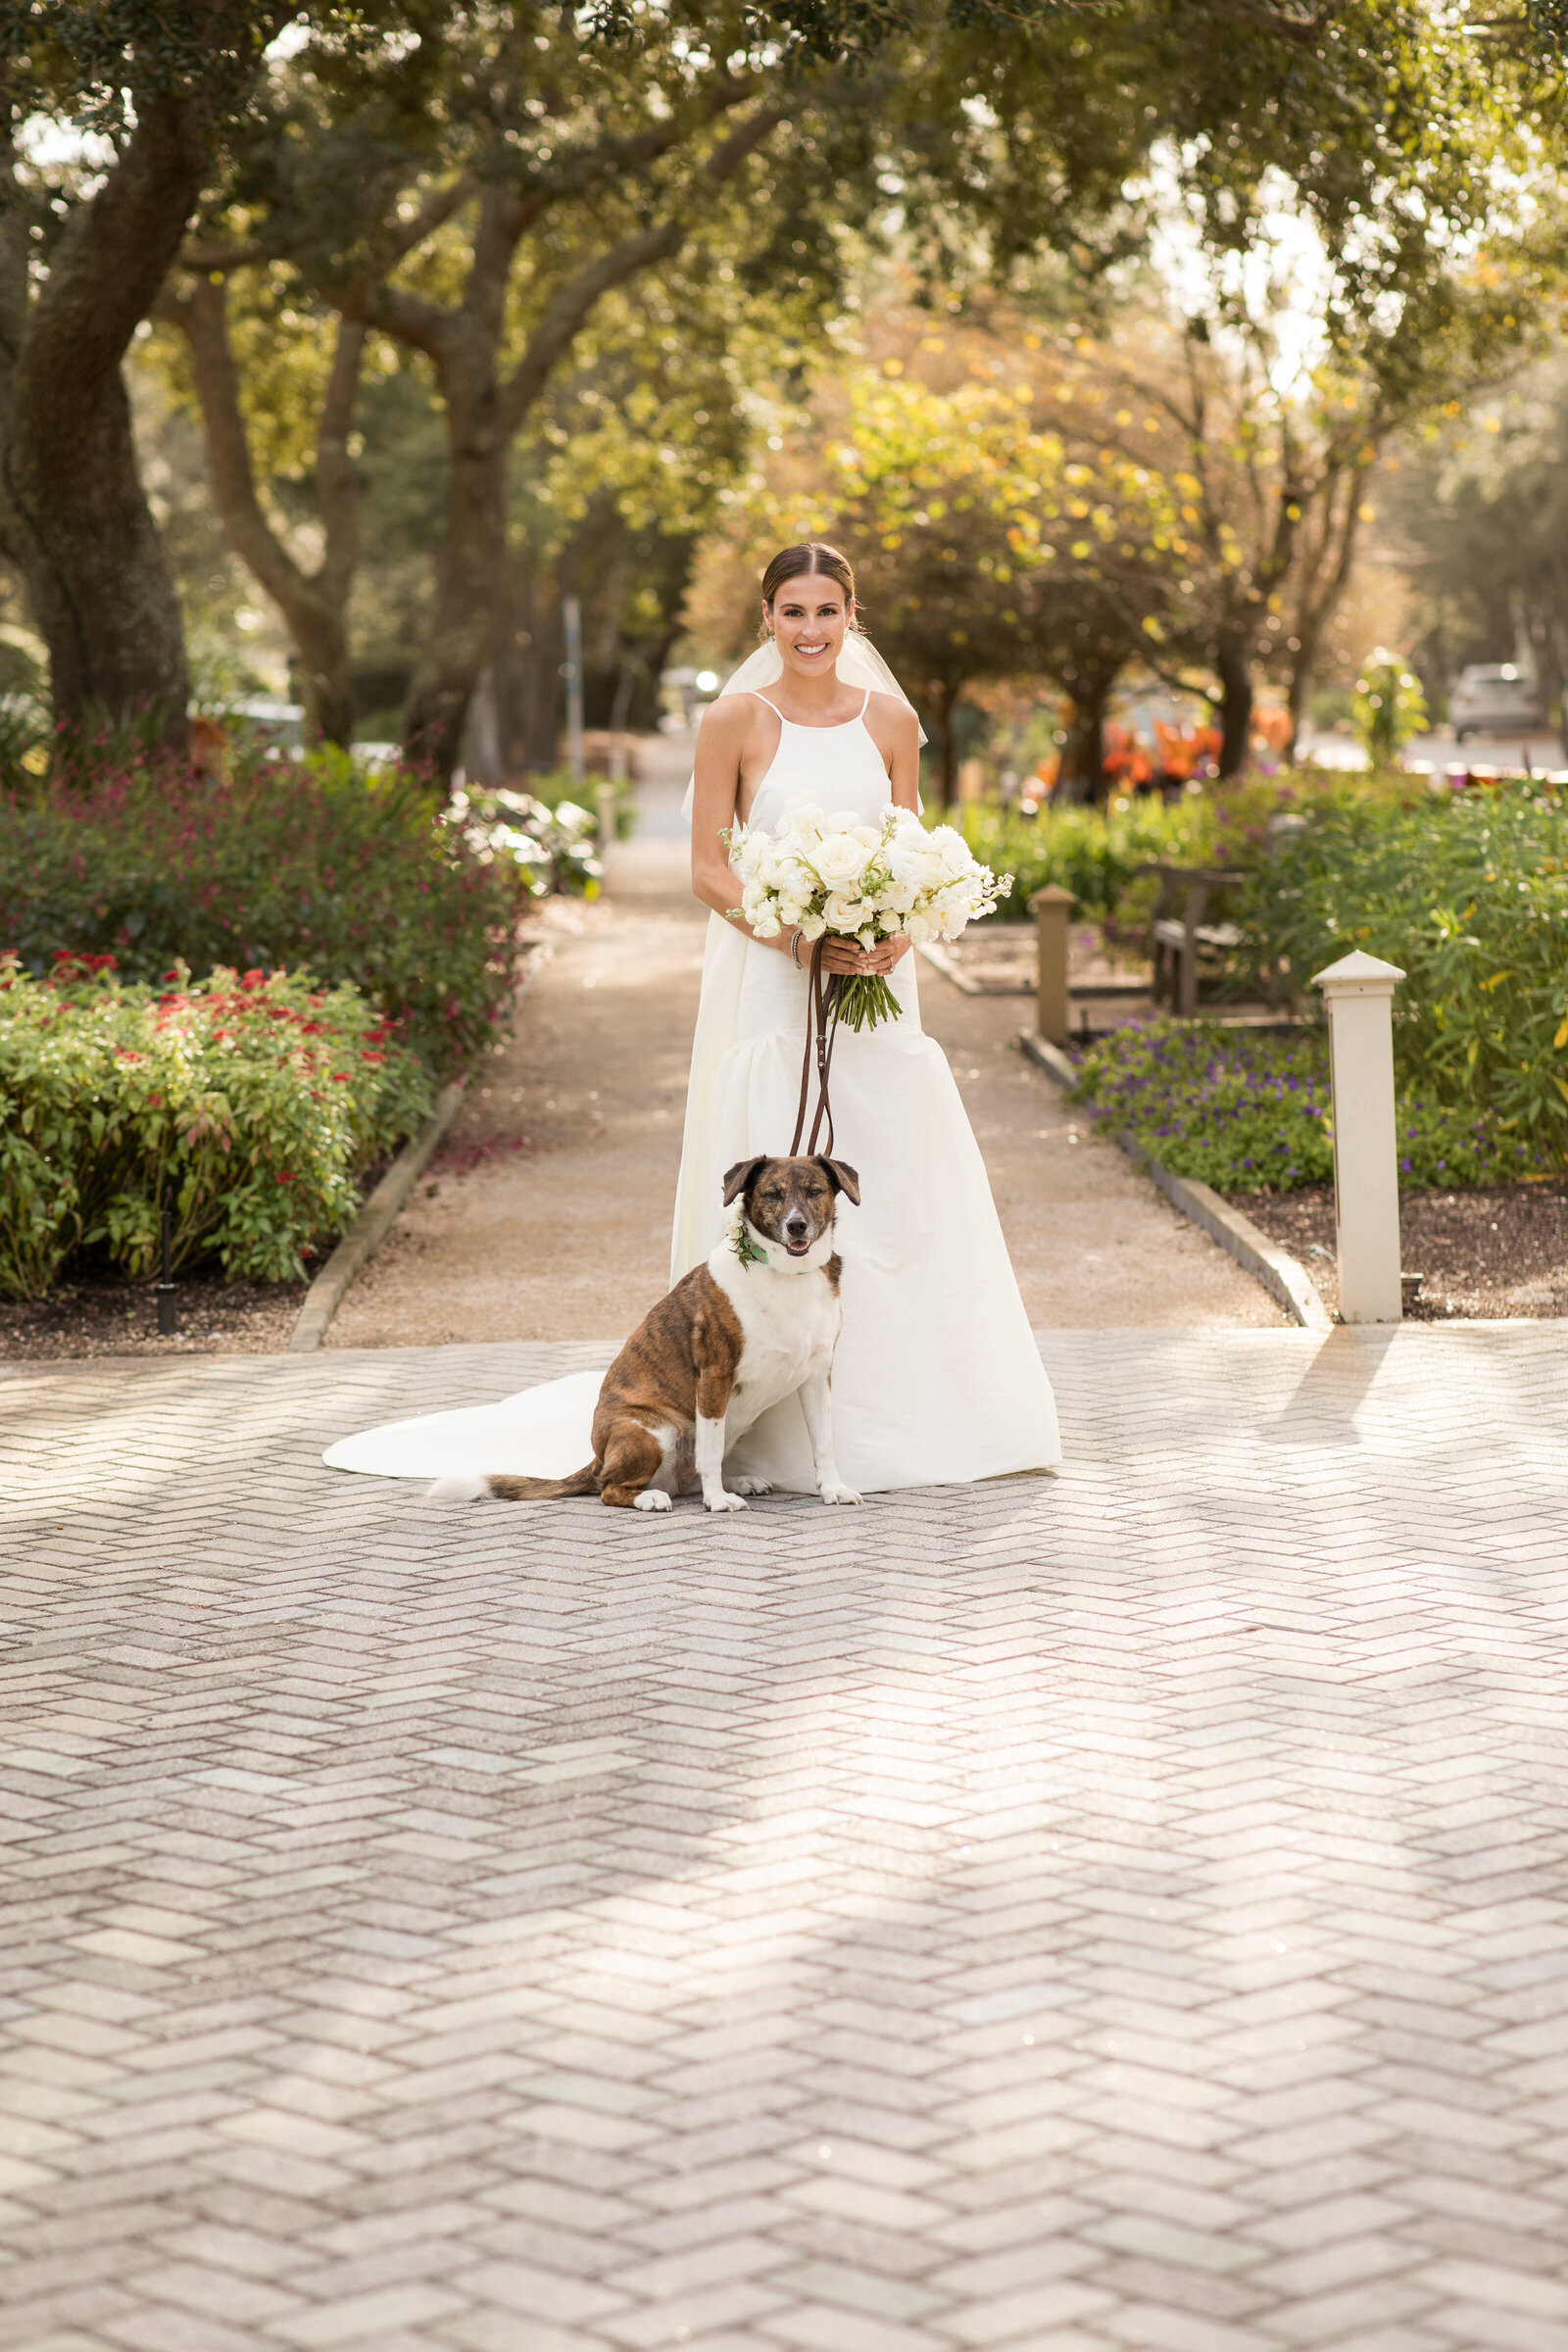 Watercolor weddings and wedding planner for destination wedding with bride and her dog.